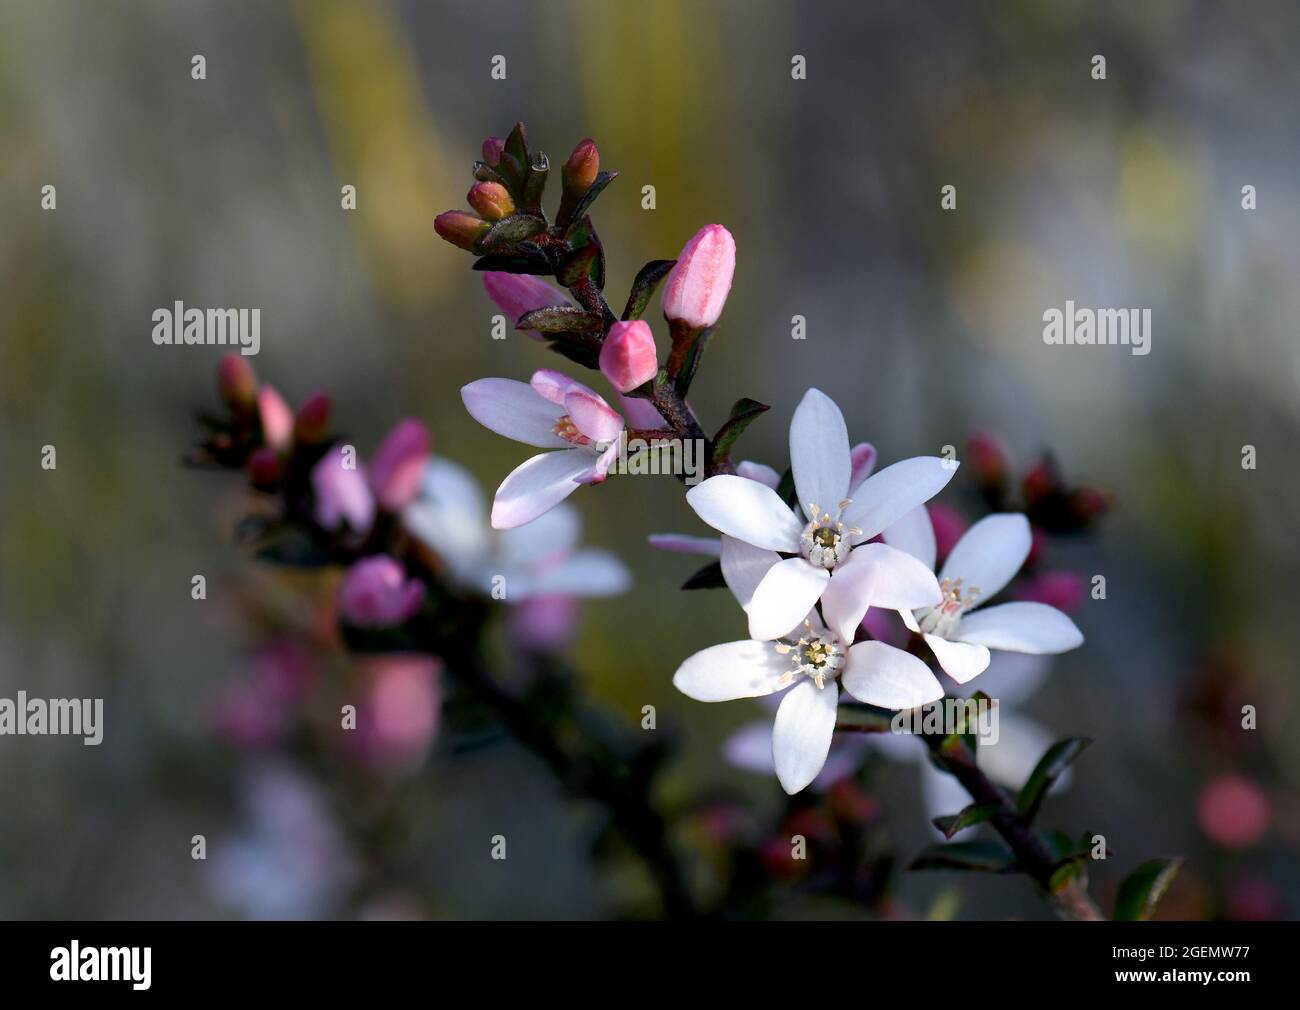 Nature background of white flowers and pink buds of the Australian native Box Leaf Waxflower, Philotheca buxifolia, family Rutaceae, growing in heath, Stock Photo